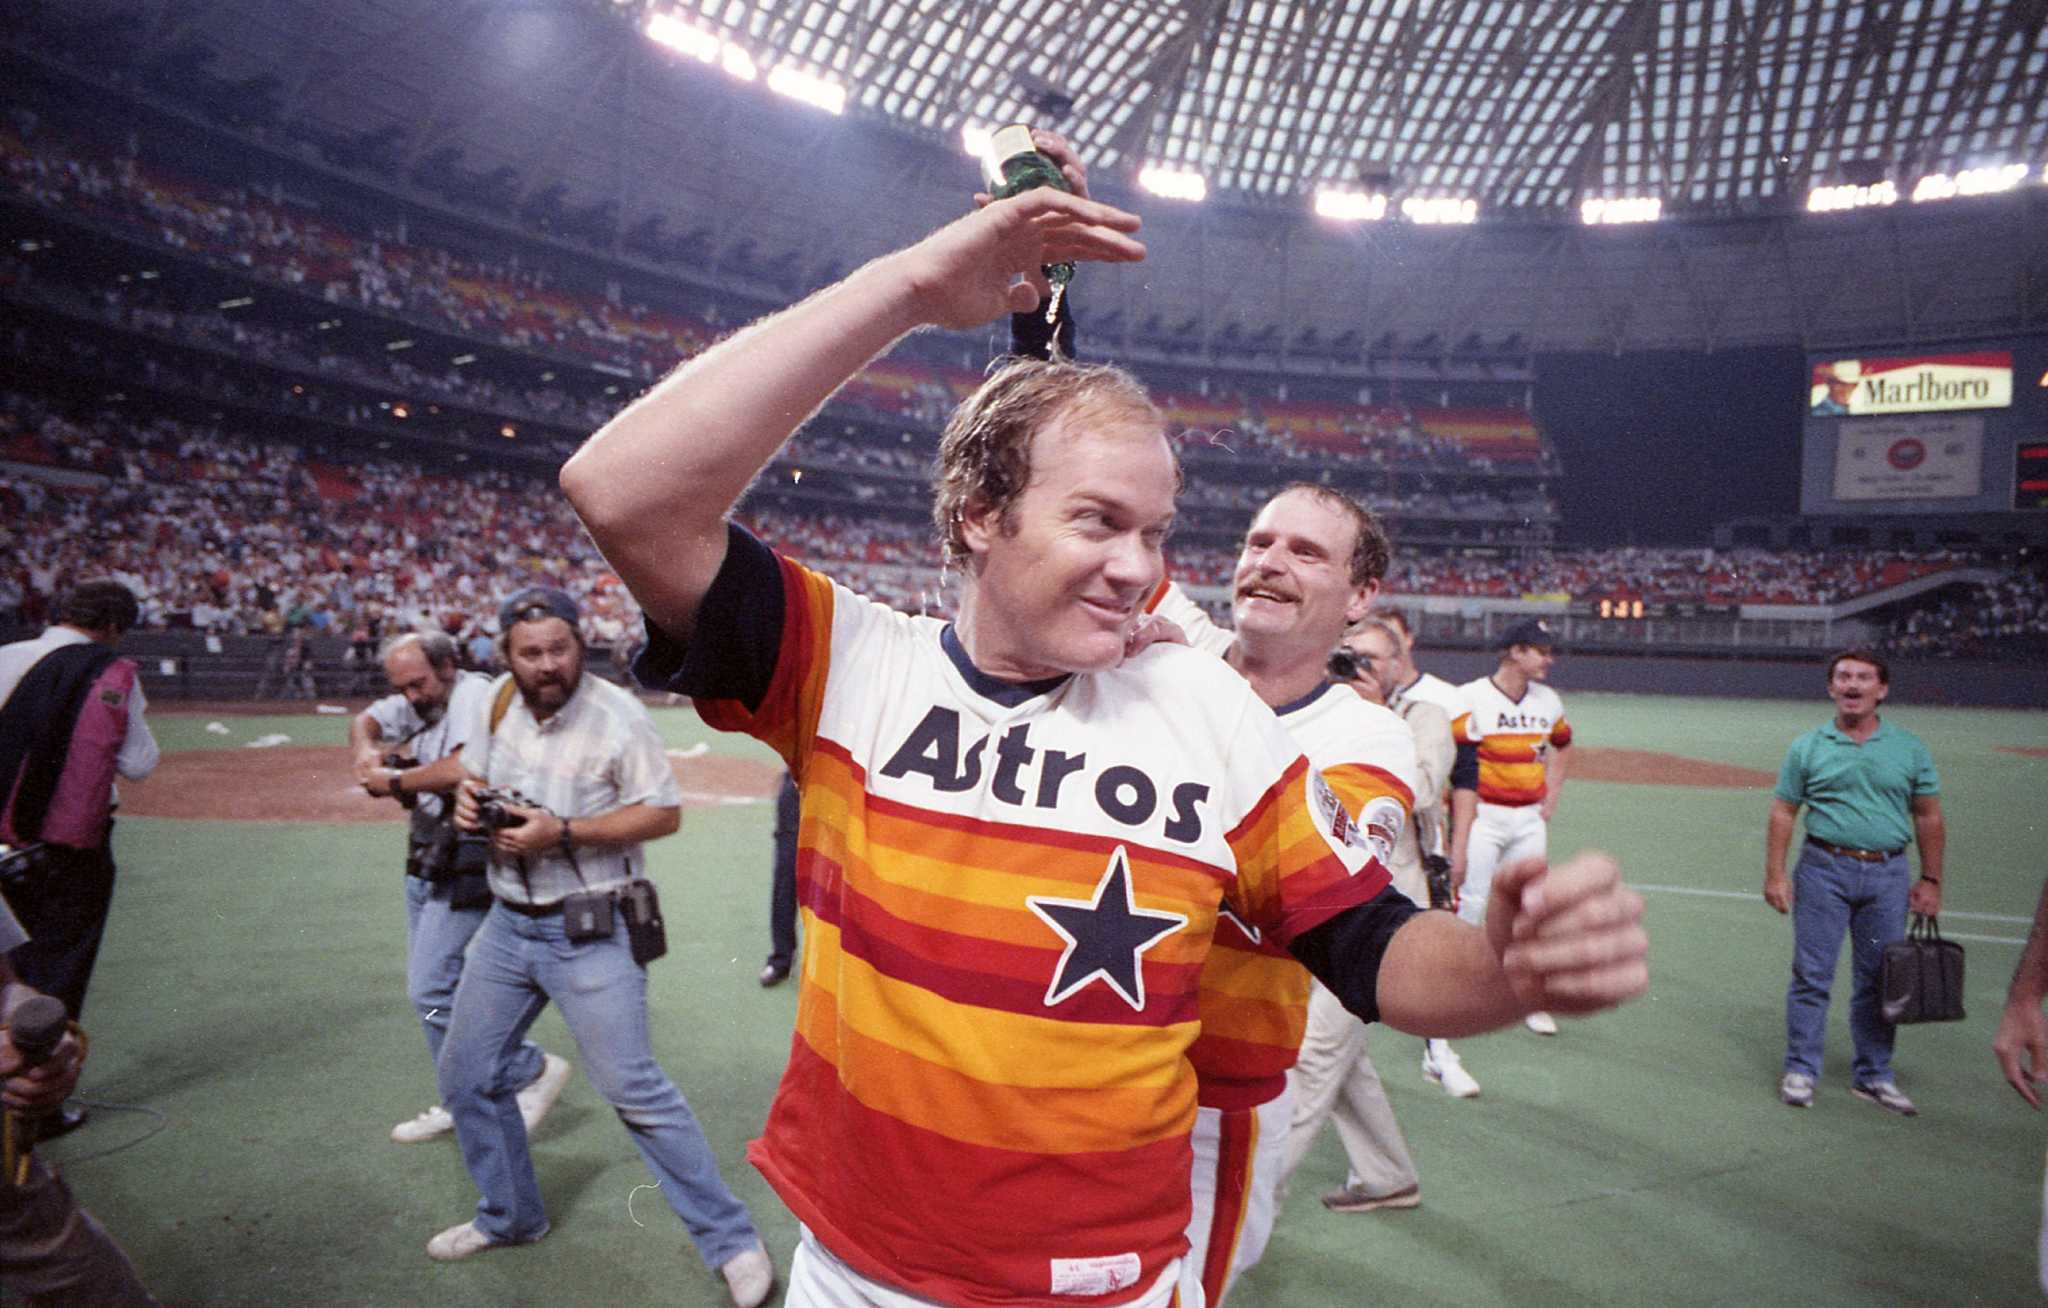 Remembering Astros' Mike Scott's clinching no-hitter 31 years ago